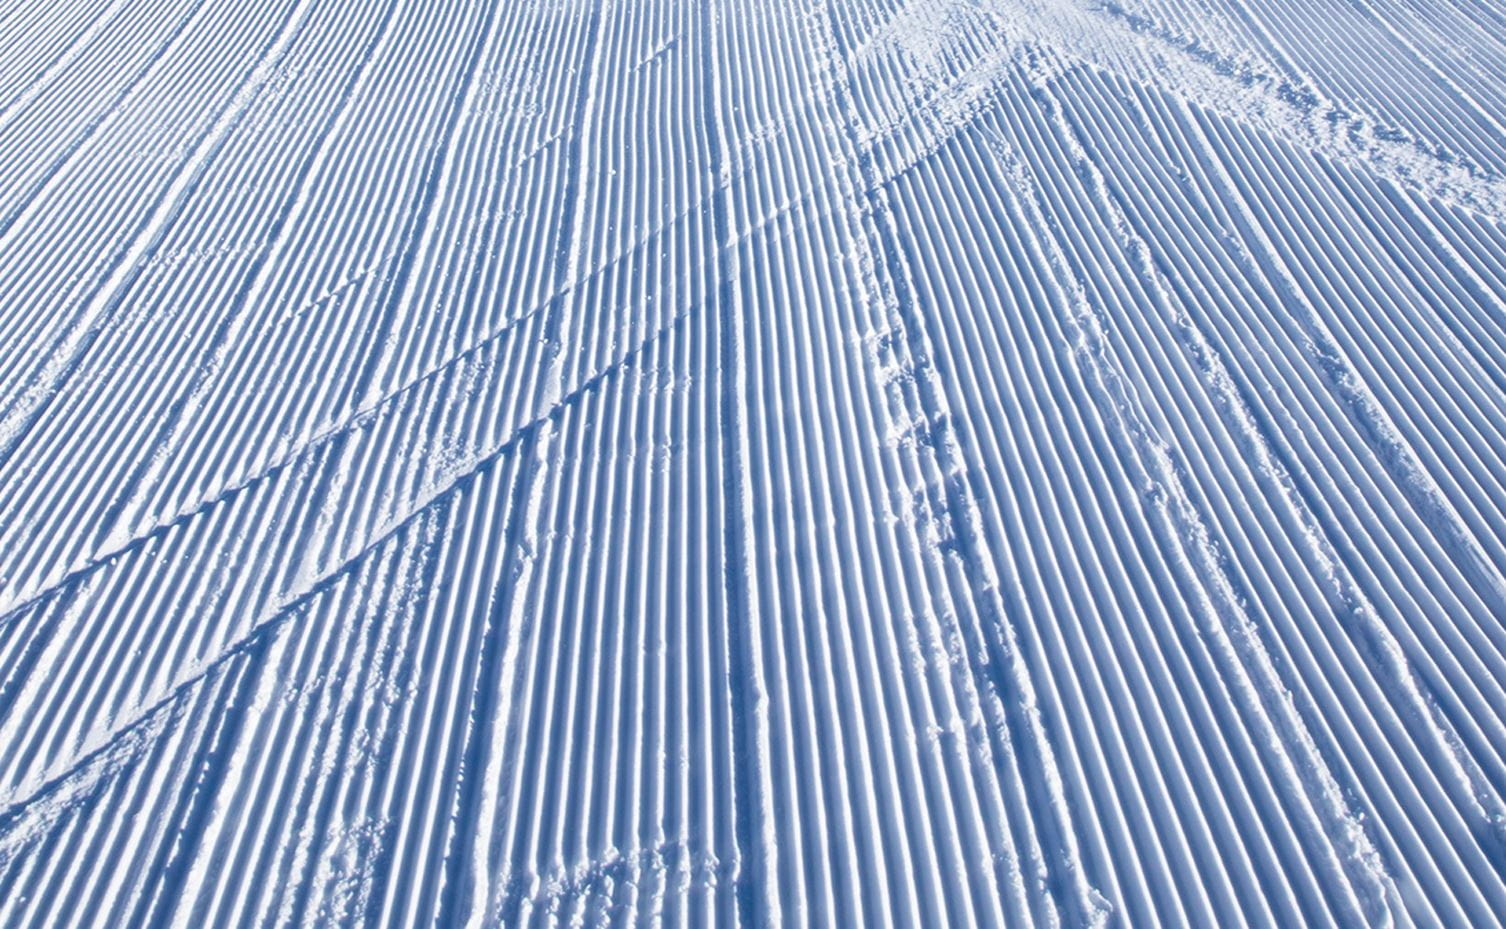 Groomer corduroy at Snowmass